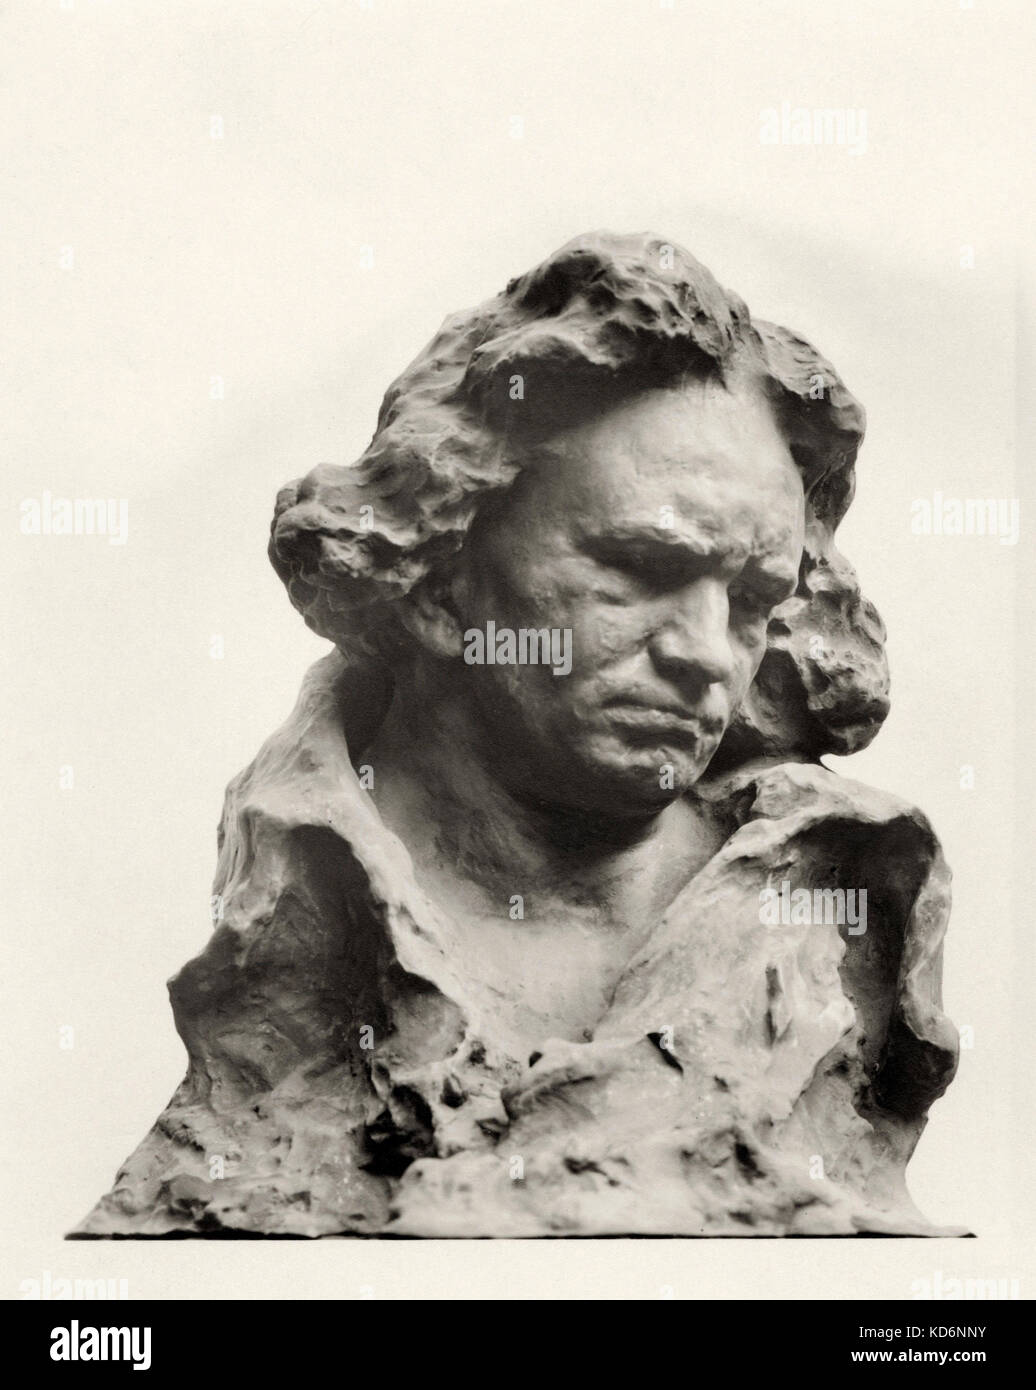 Ludwig van Beethoven - Bust statue, by N. Aronson.  German composer, 17 December  1770 - 26 March 1827. Stock Photo